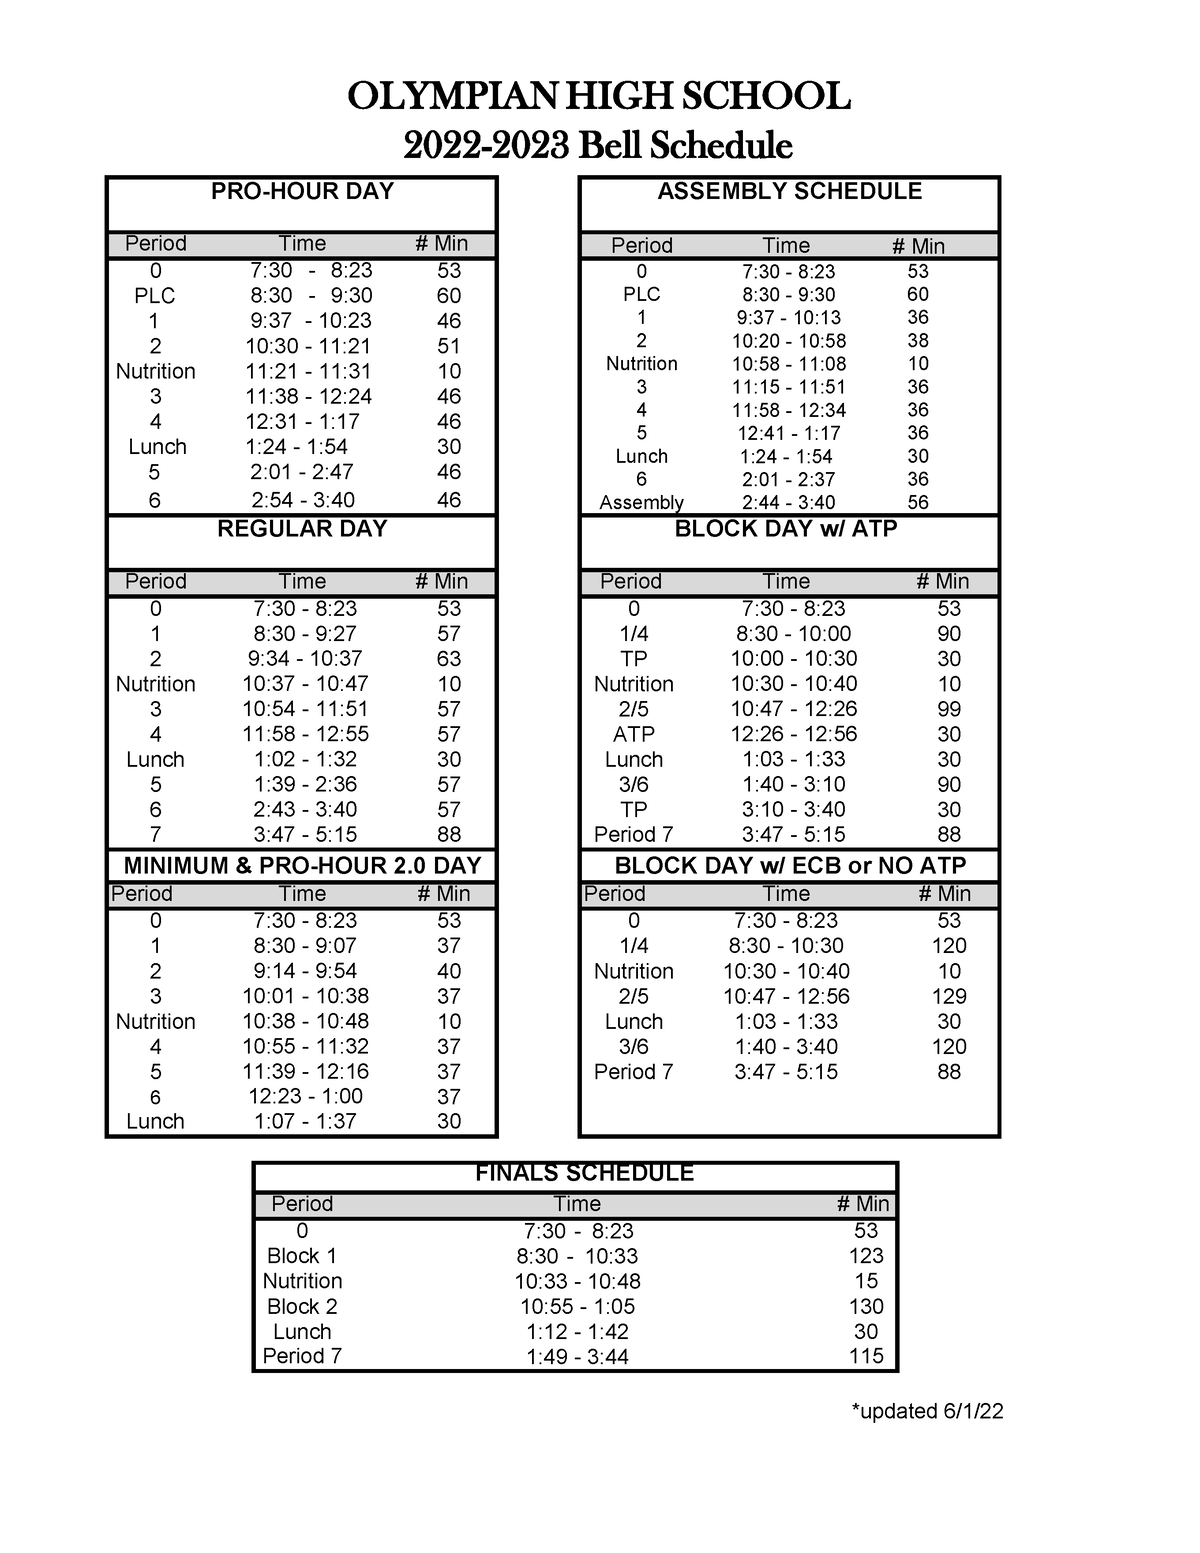 OHS Daily Bell Schedules - OLYMPIAN HIGH SCHOOL 2022 - 2023 Bell